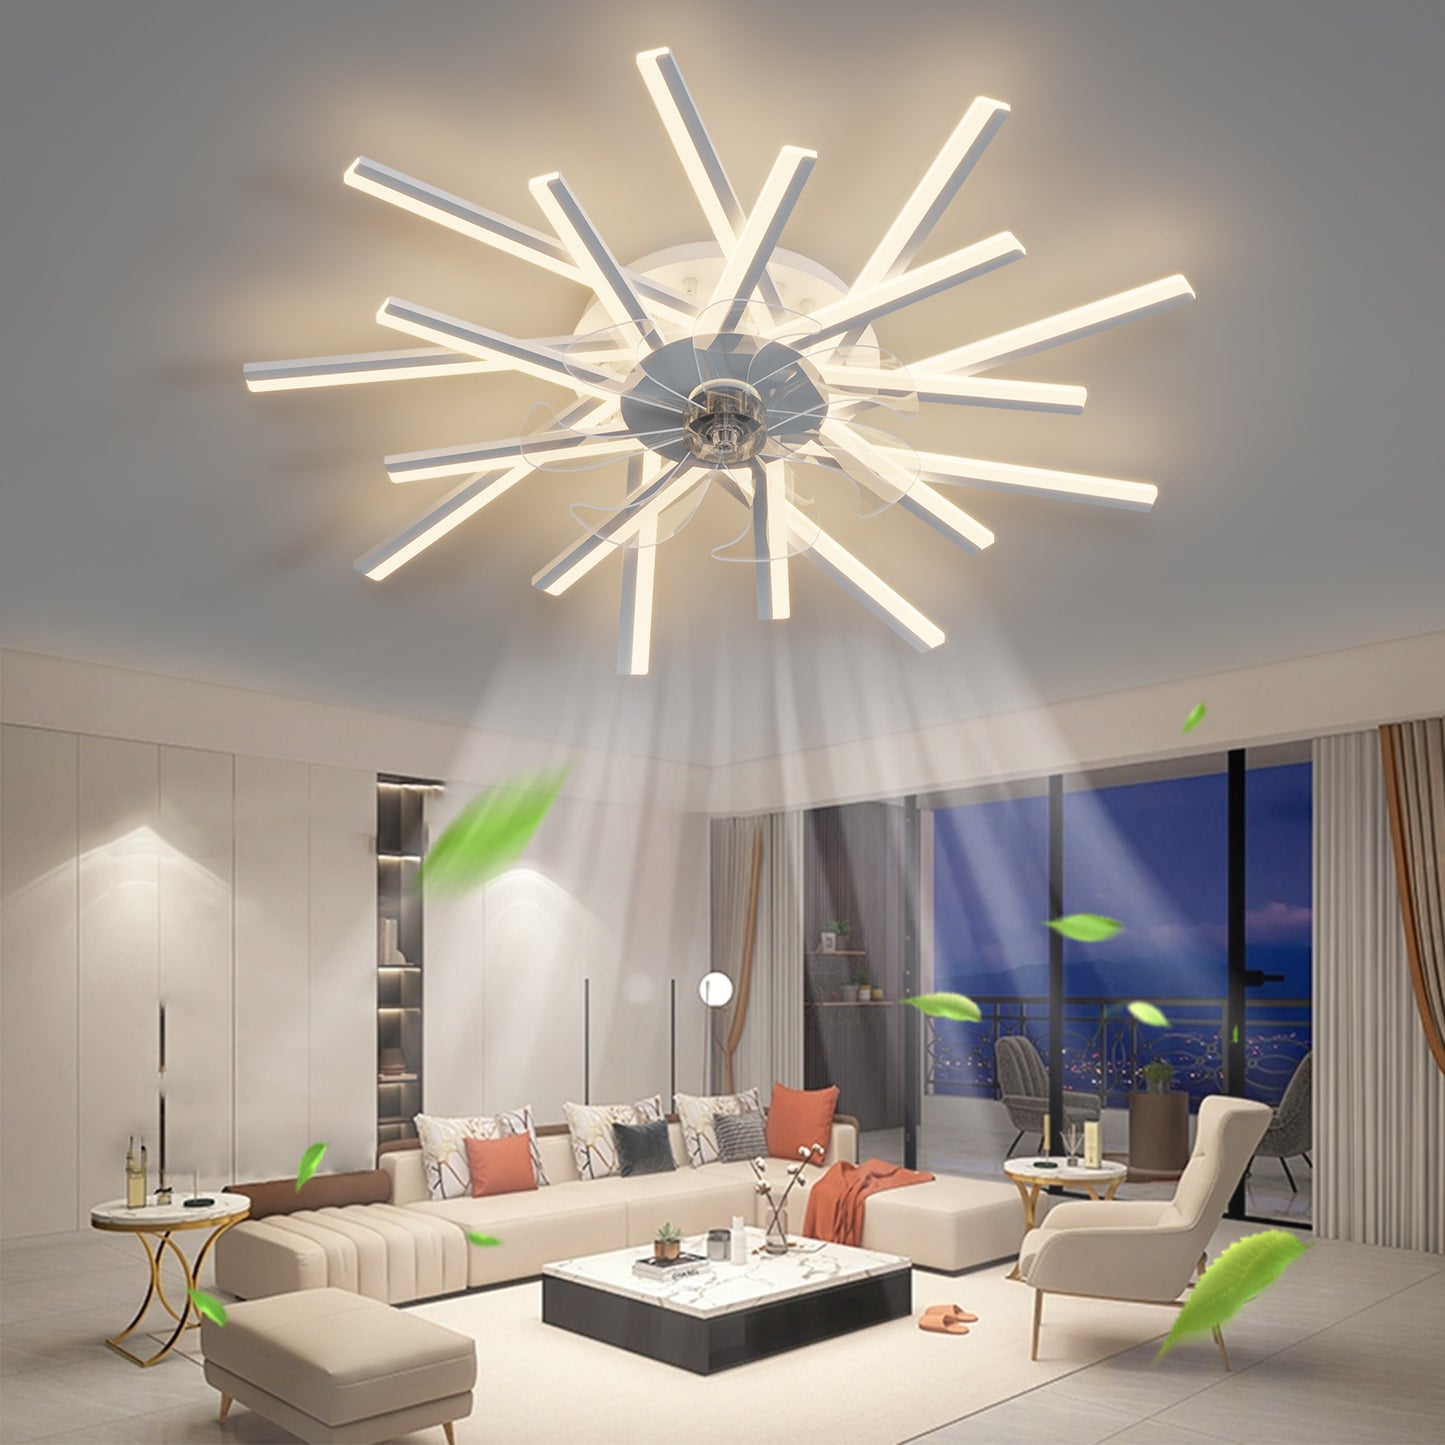 36-Inch Smart Ceiling Fan with Dimmable LED Lights and Remote Control